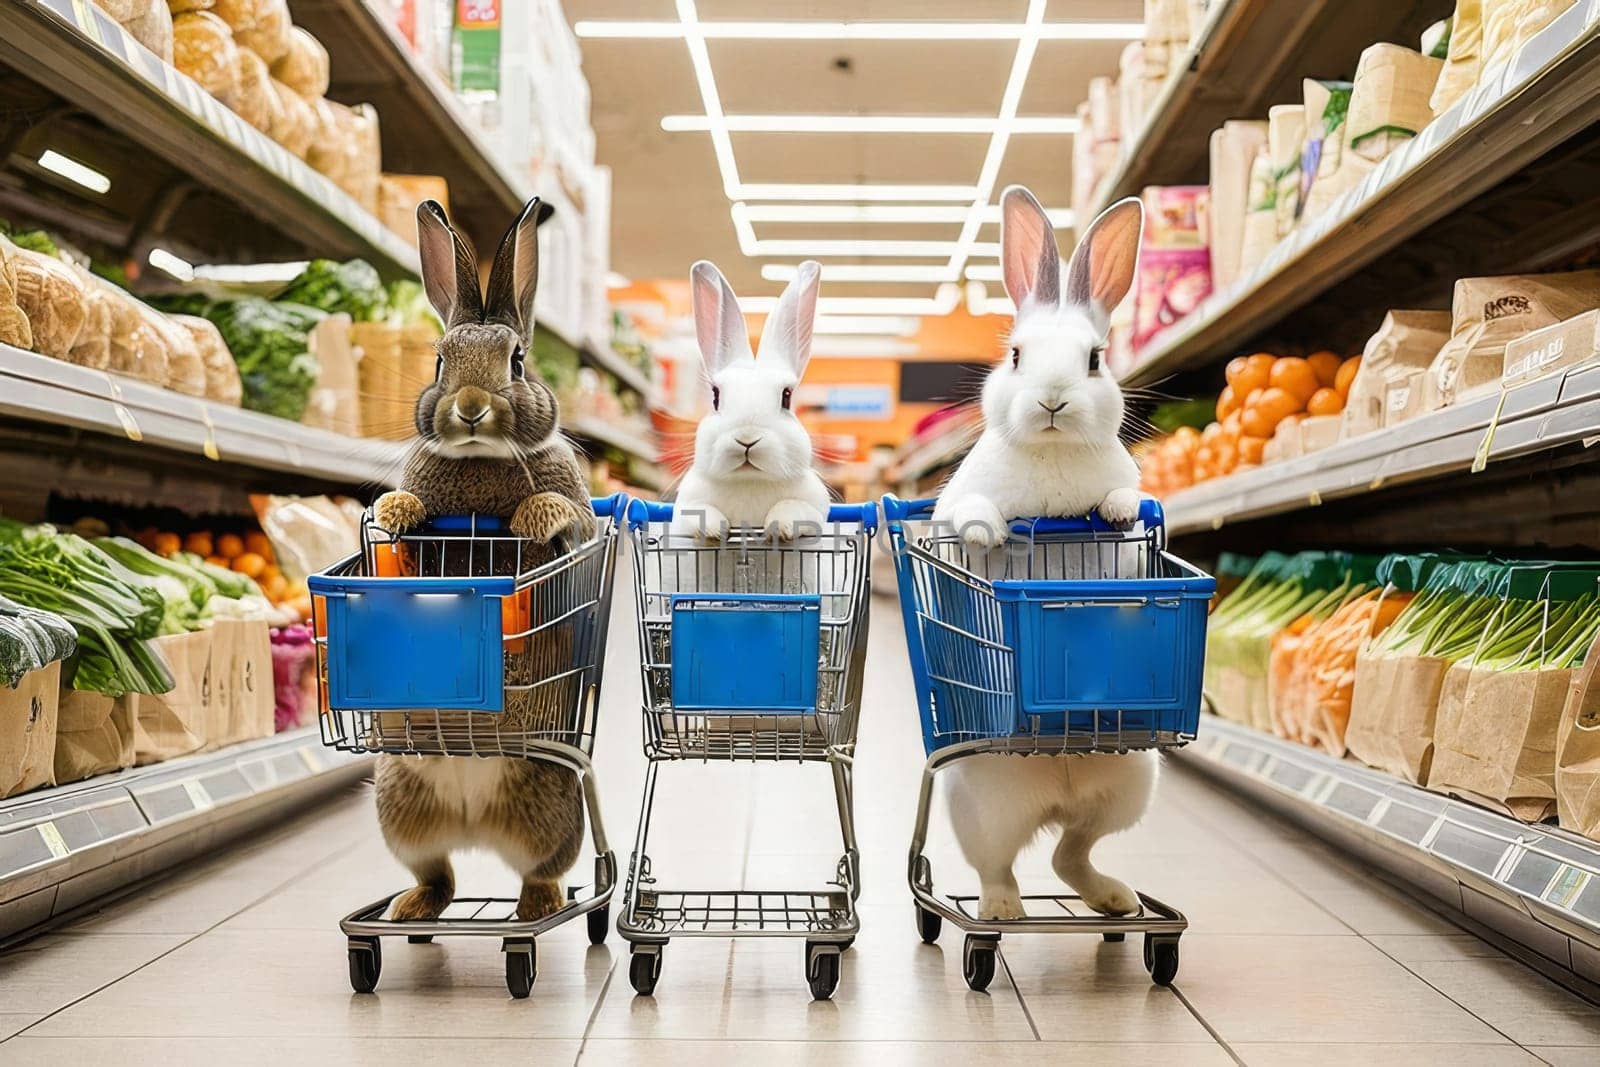 A family of rabbits in a store with carts makes purchases